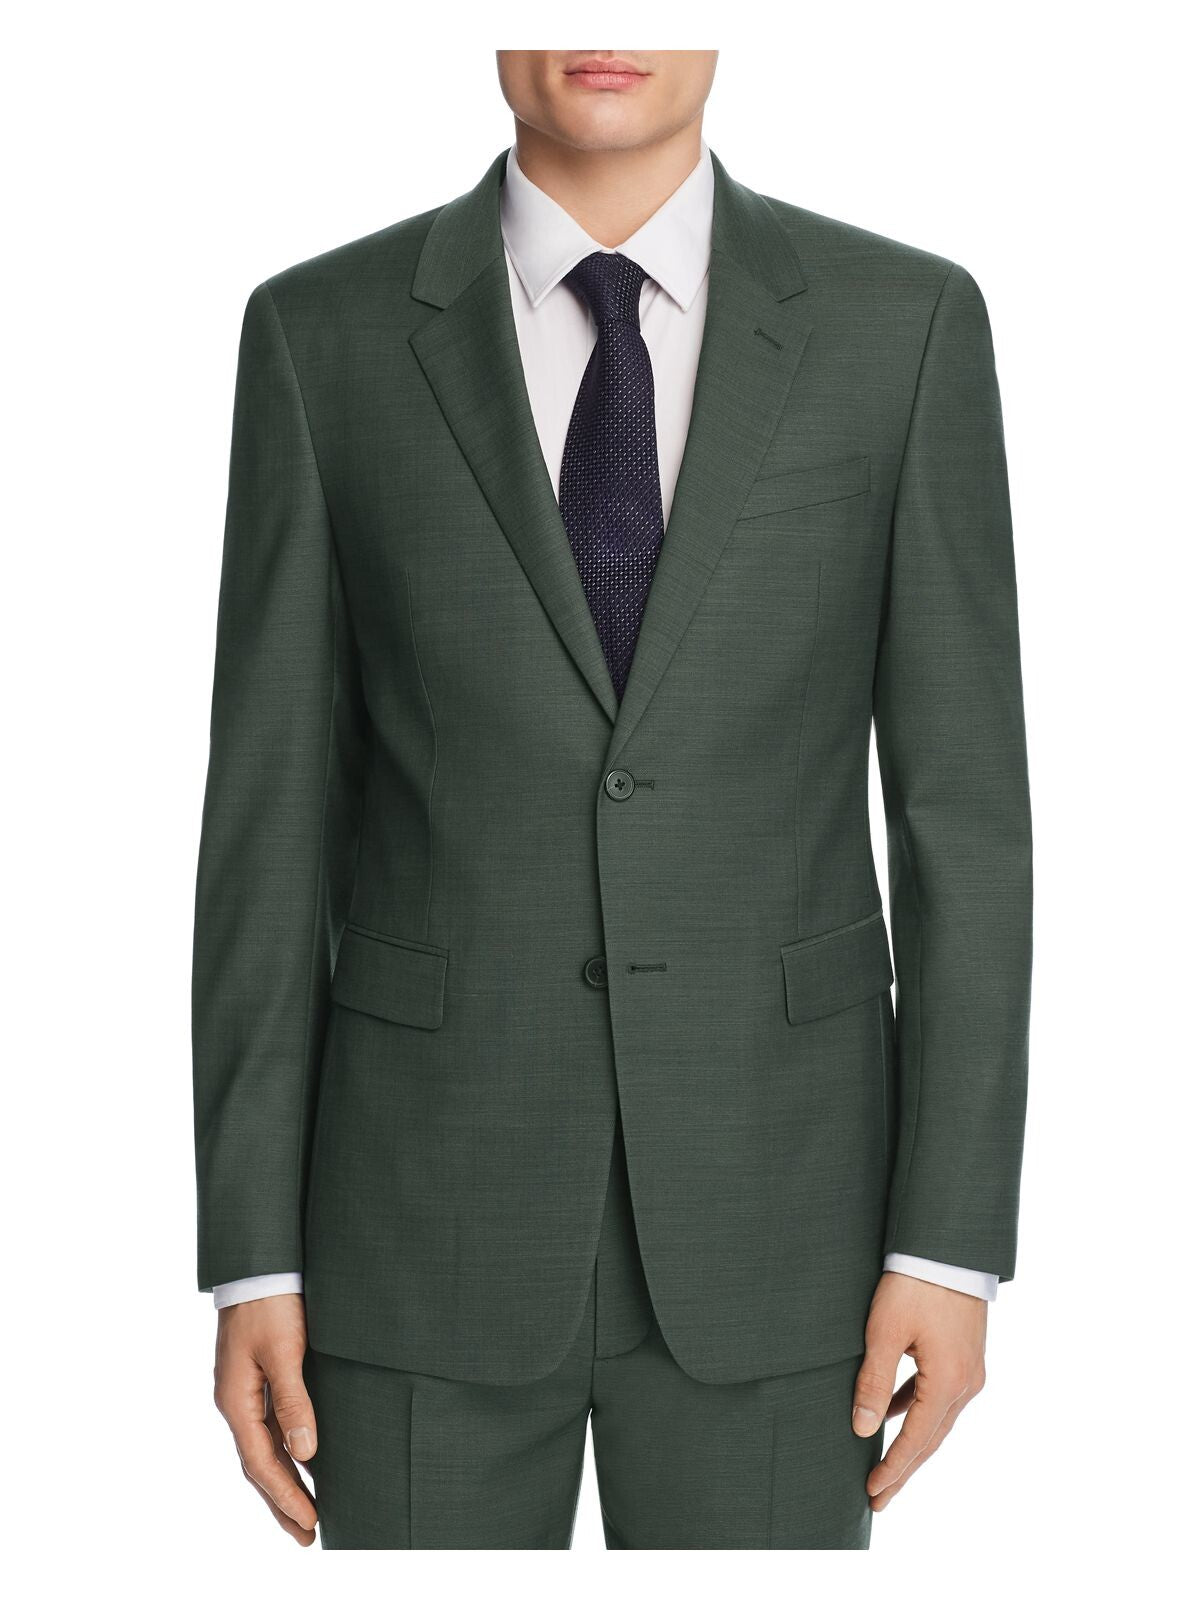 THEORY Mens Chambers Green Single Breasted, Slim Fit Suit Separate Blazer Jacket 44R